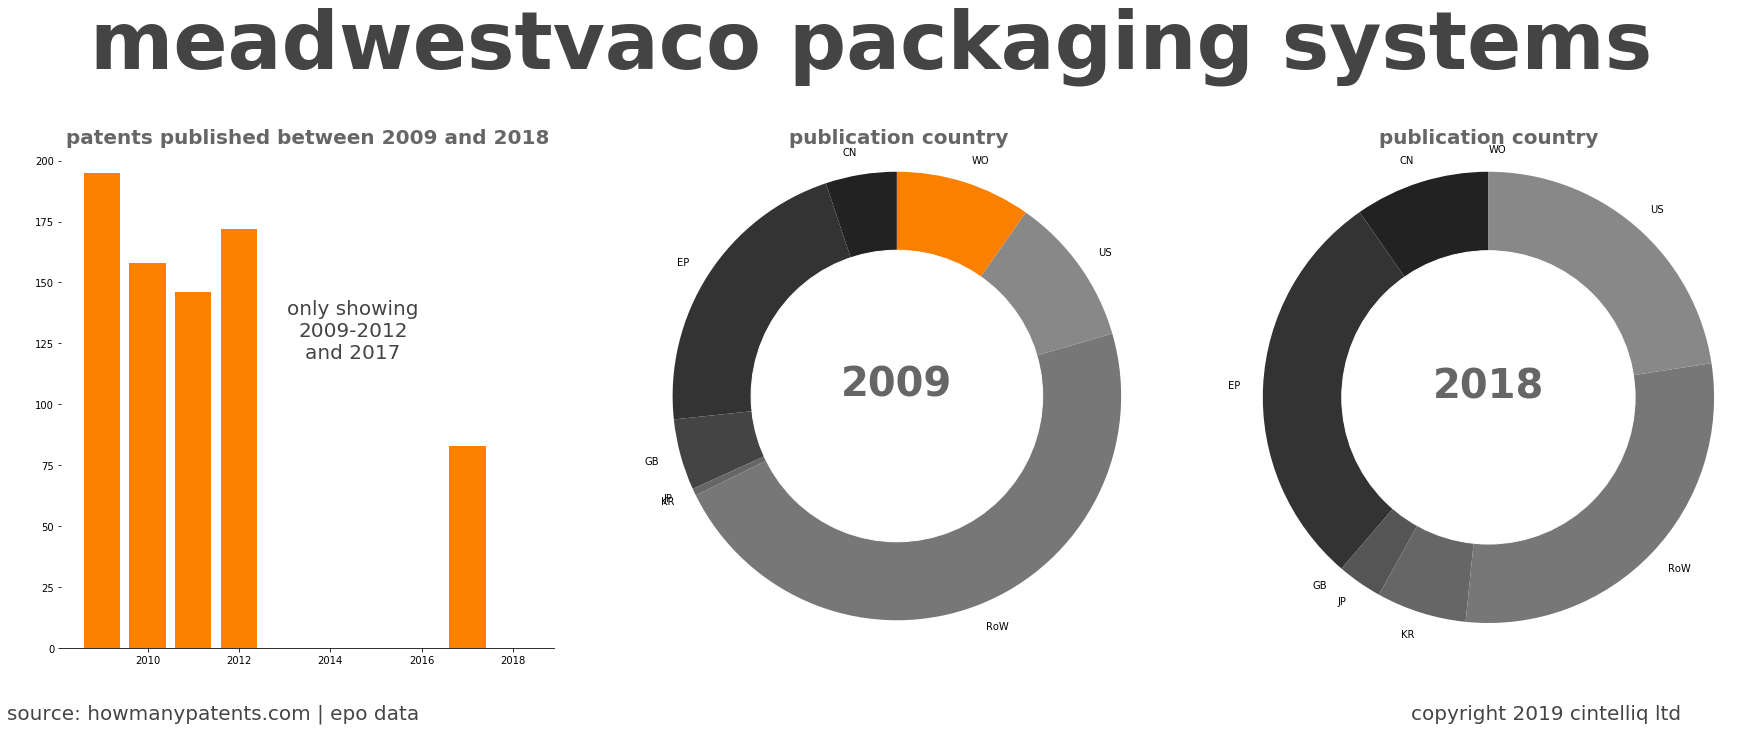 summary of patents for Meadwestvaco Packaging Systems